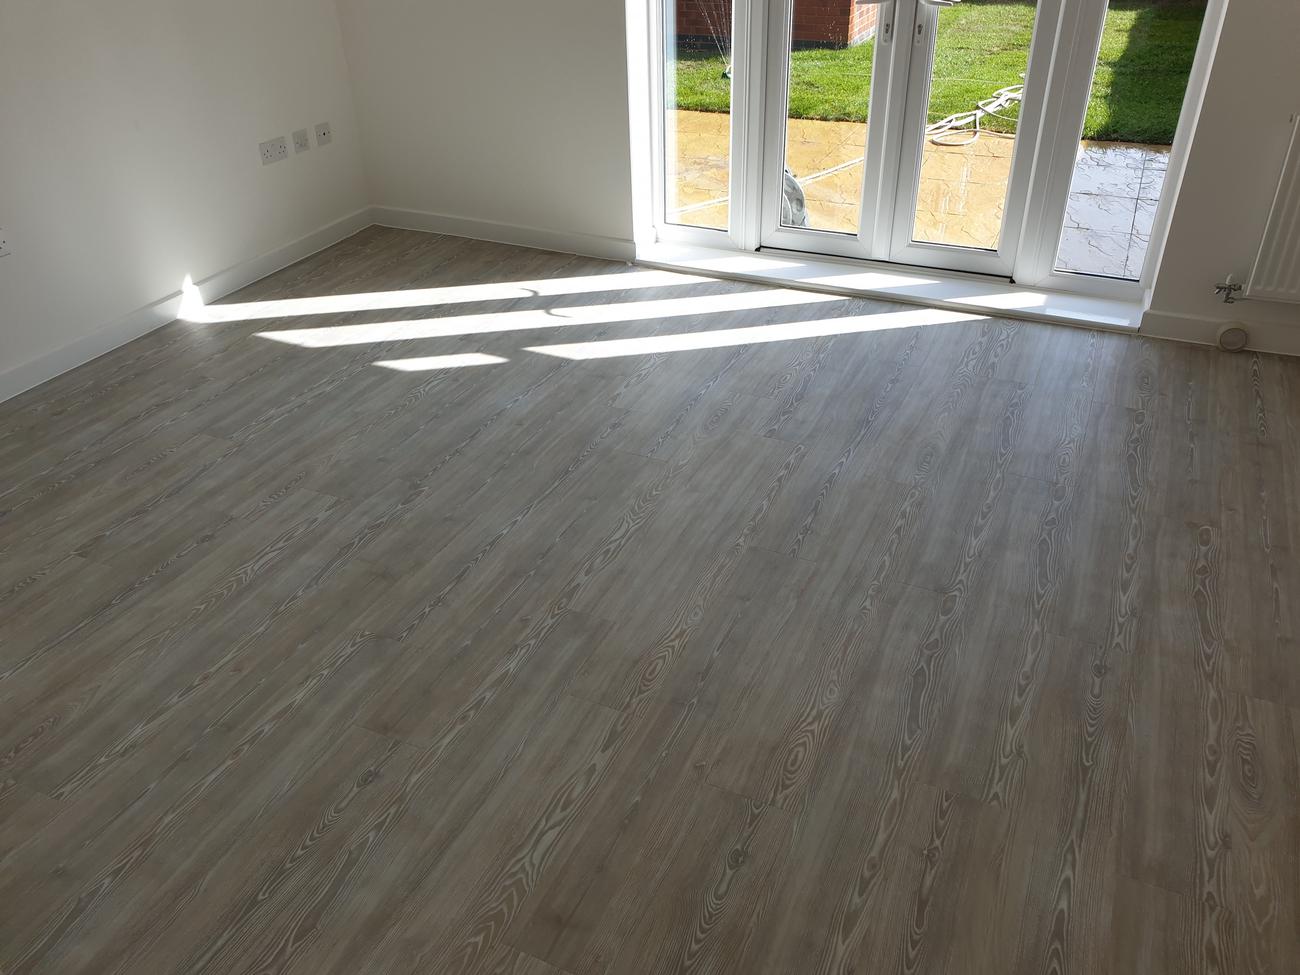 Our Gallery | Floor Fitters in Bristol | JCT Flooring gallery image 16